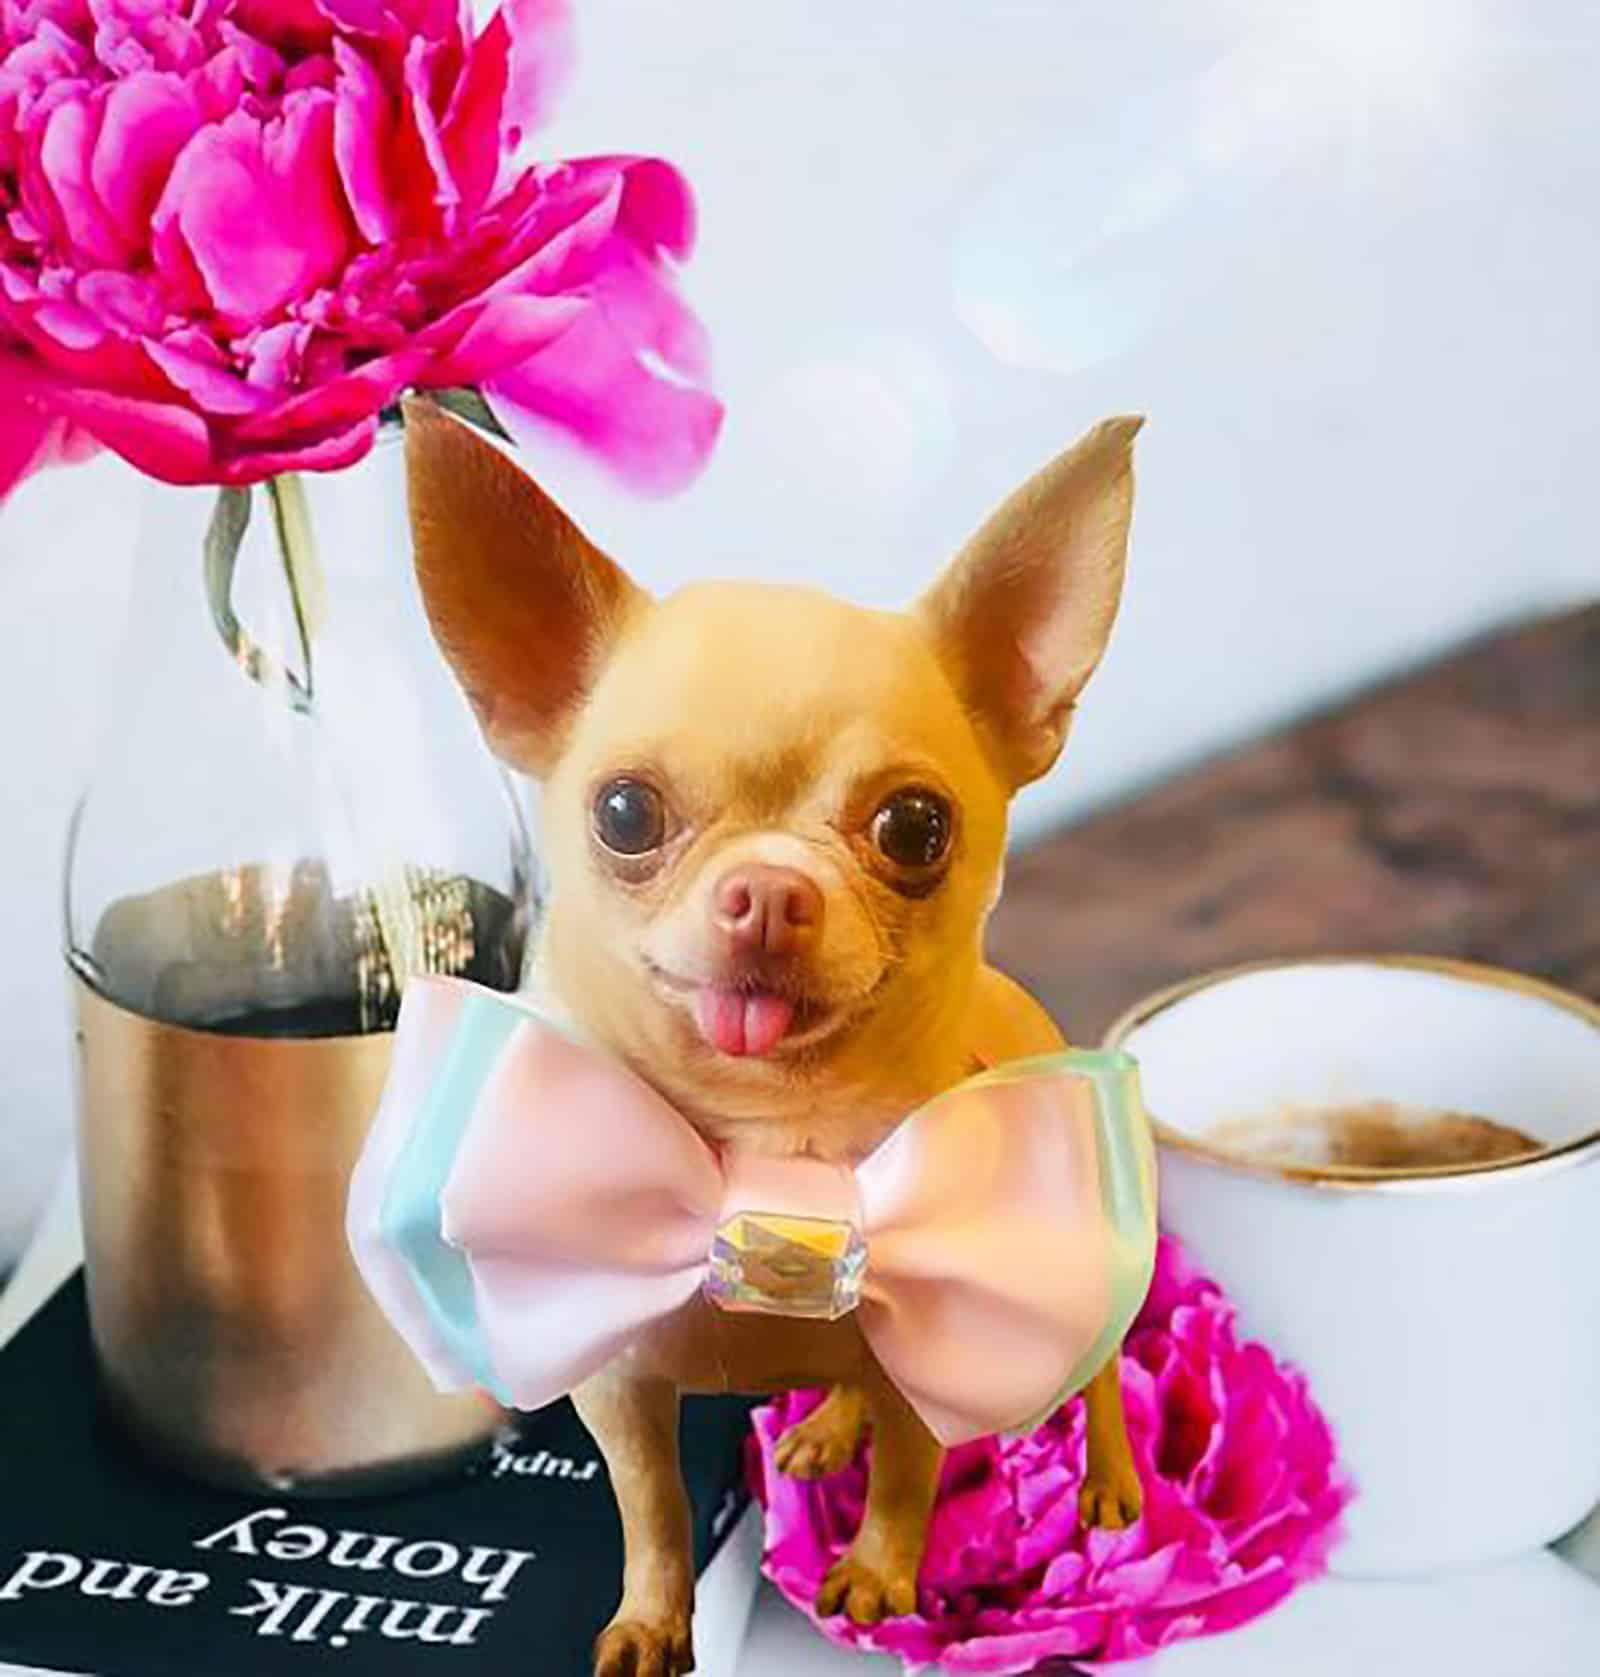 teacup chihuahua wearing a tie